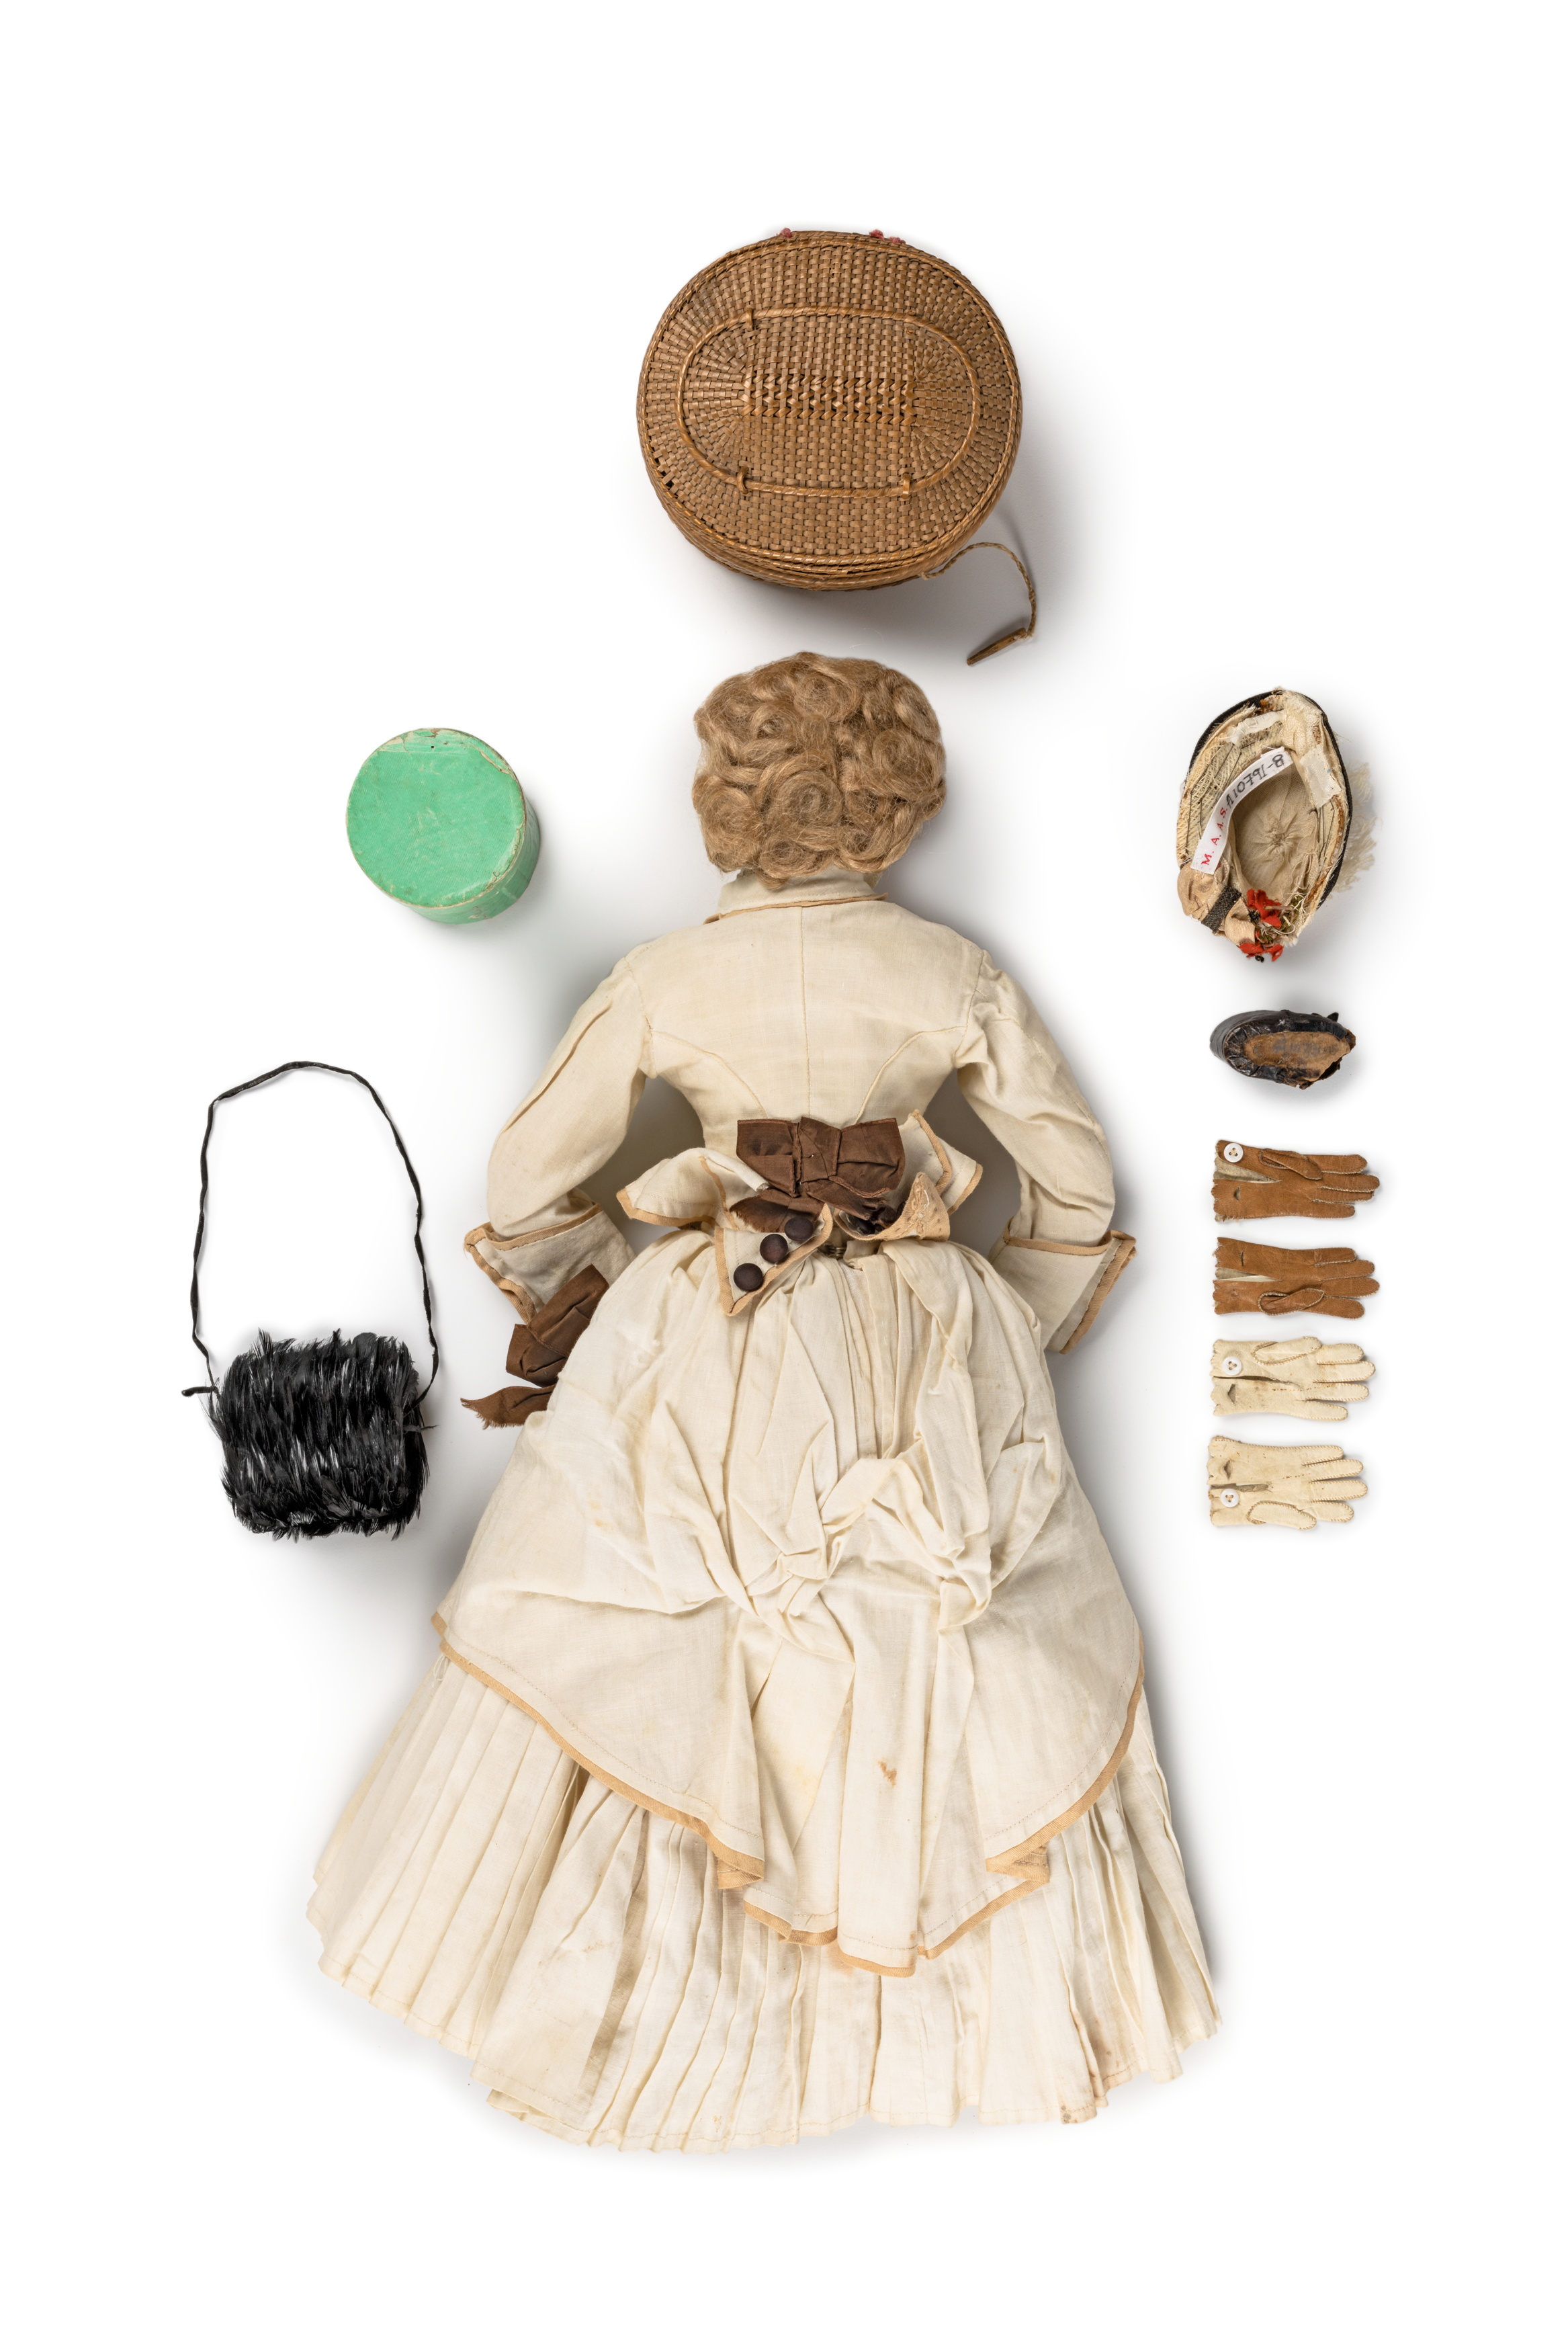 Bisque fashion doll with accessories